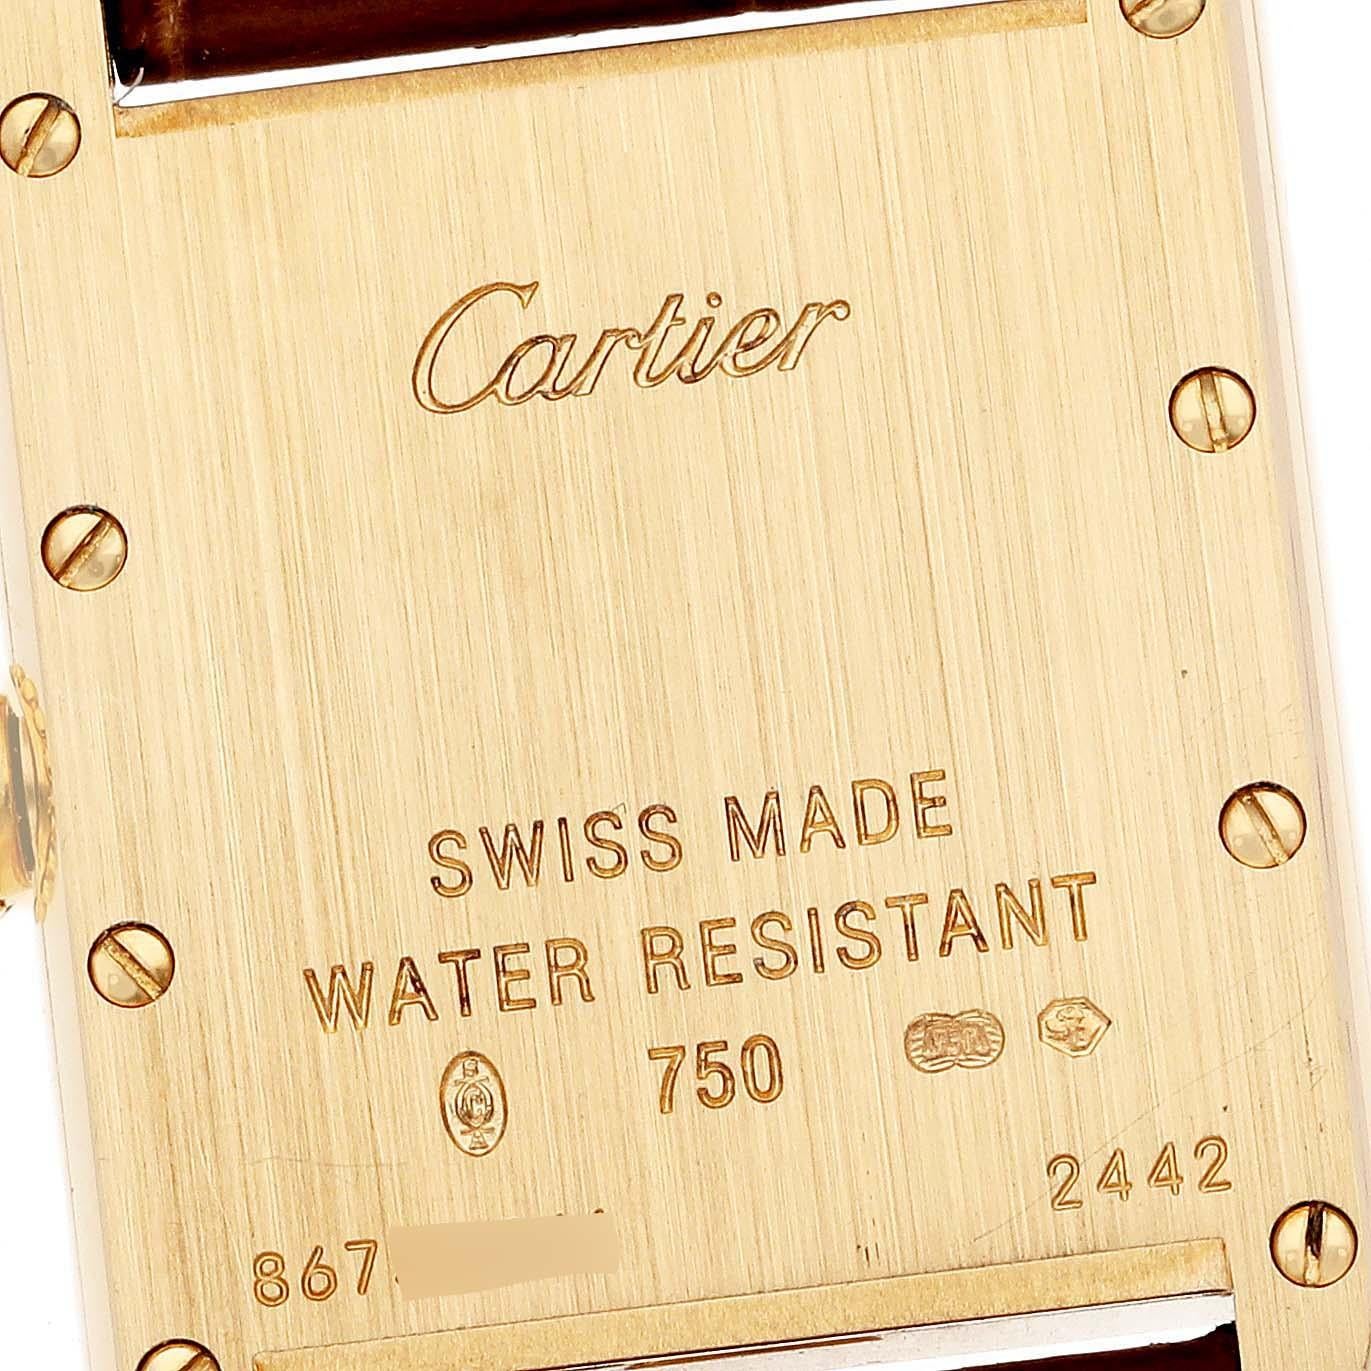 Cartier Tank Louis Small Yellow Gold Brown Strap Ladies Watch W1529856 Papers. Quartz movement. 18k yellow gold case 29.0 x 22.0 mm. Circular grained crown set with a blue sapphire cabochon. . Scratch resistant mineral crystal. Silvered grained dial